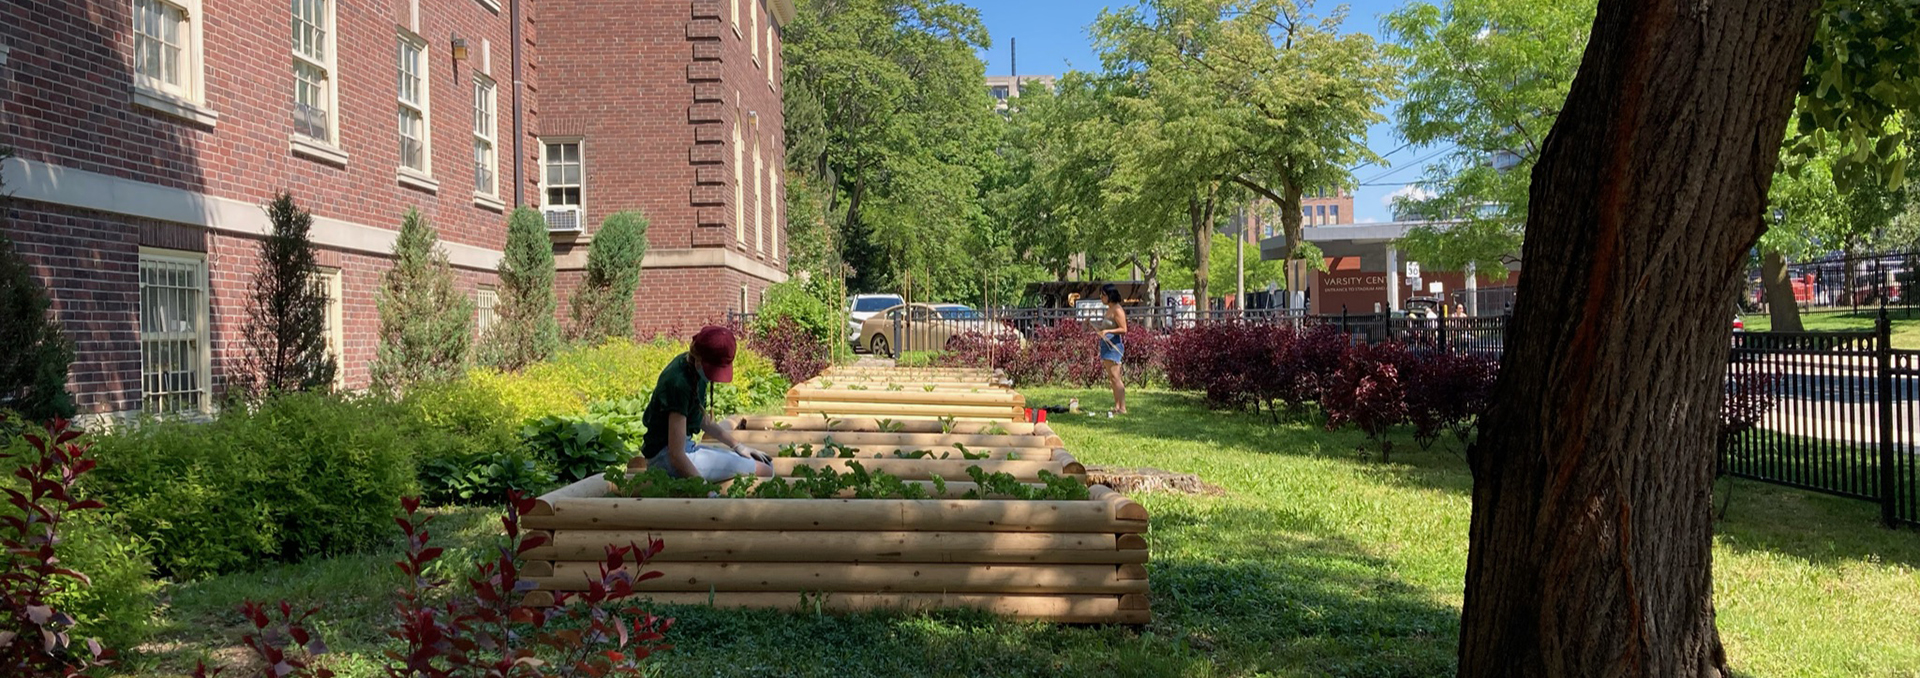 Students tend to the raise garden beds at St. Hilda's College